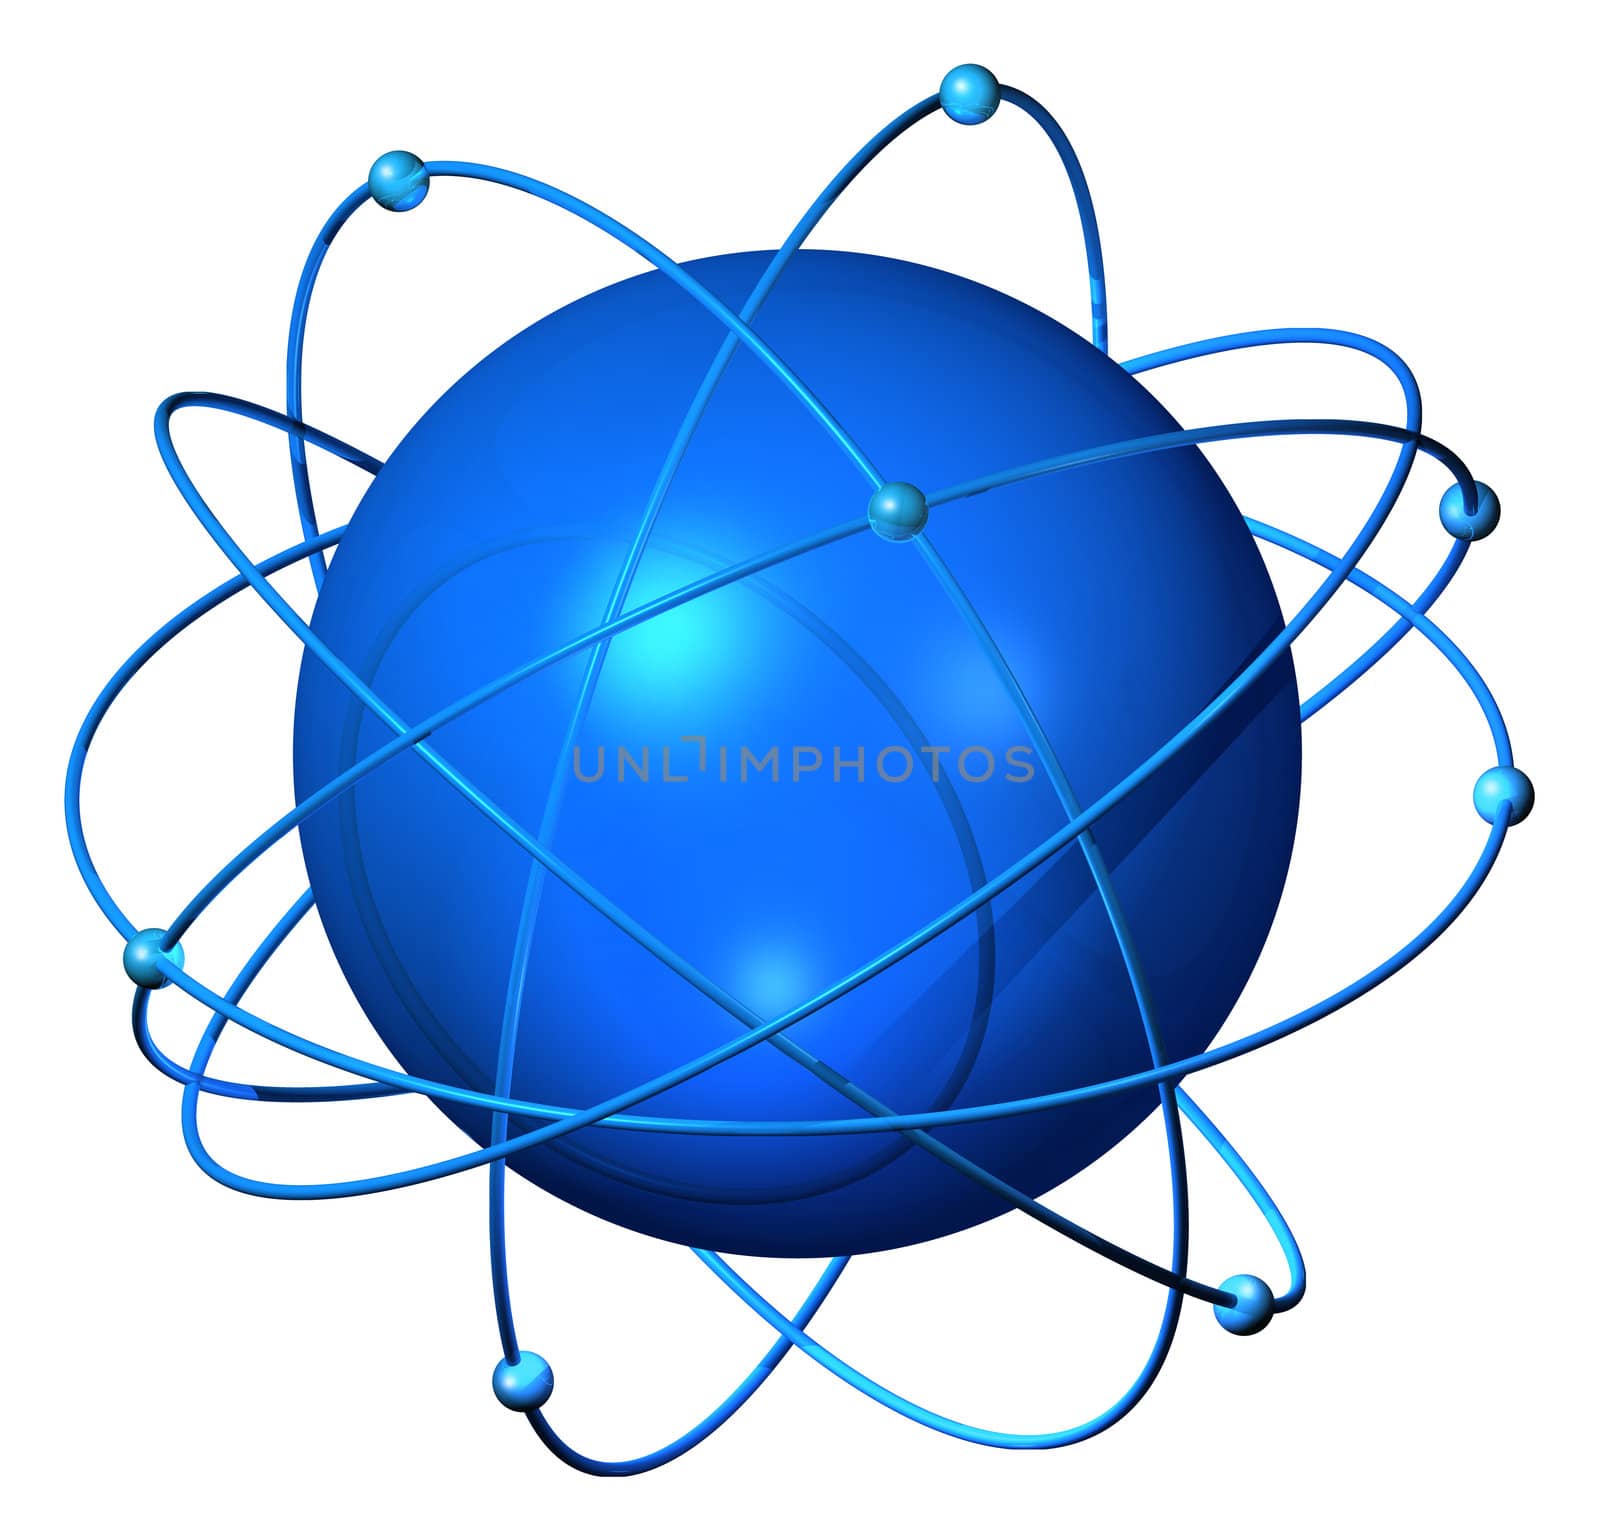 Atomium sphere with electrons and neutrons forming satellite orbit web around the blue globe